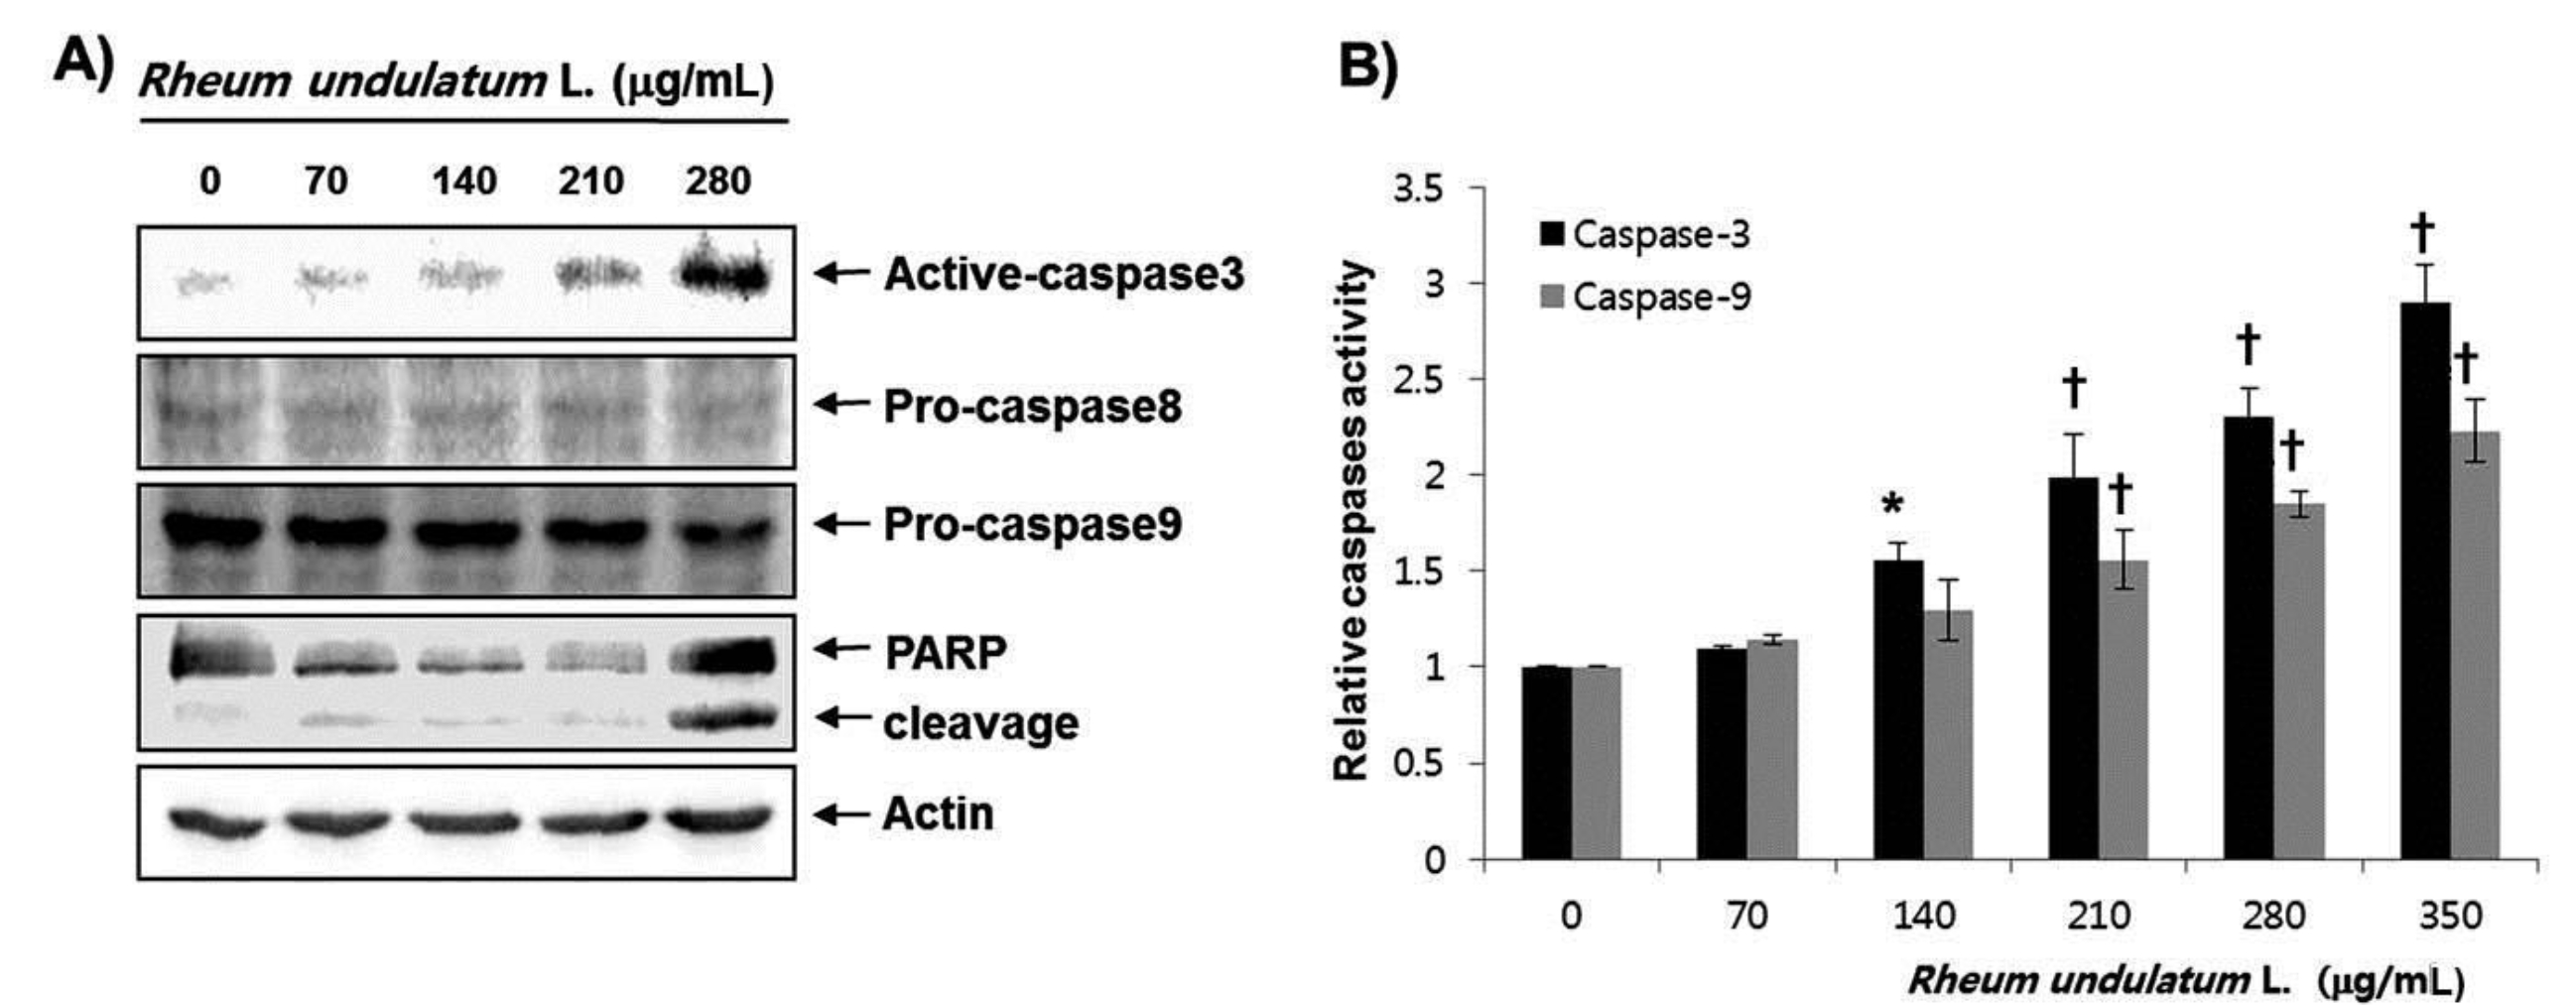 Activation of caspases and degradation of the PARP protein due to MERL treatment of AGS cells. (A) AGS cells were treated with the indicated concentrations of MERL for 24 hours. Actin was used as an internal control. (B) After a 24 hours incubation with the indicated concentrations of MERL, the cells were lysed and aliquots were assayed for the in-vitro caspase-3 and -9 activities with DEVD-pNA and LEHD-pNA as substrates, respectively. Bars represent the mean ± SD. *P < 0.05. †P < 0.01. PARP, polymerase; MERL, methanol extract of Rheum undulatum L.; AGS, adenocarcinoma gastric cell lines; DEVD, Asp-Glu-Val-Asp; p-NA, p-nitroaniline; LEHD, Leu-Glu-His-Asp; S.D., standard deviation.